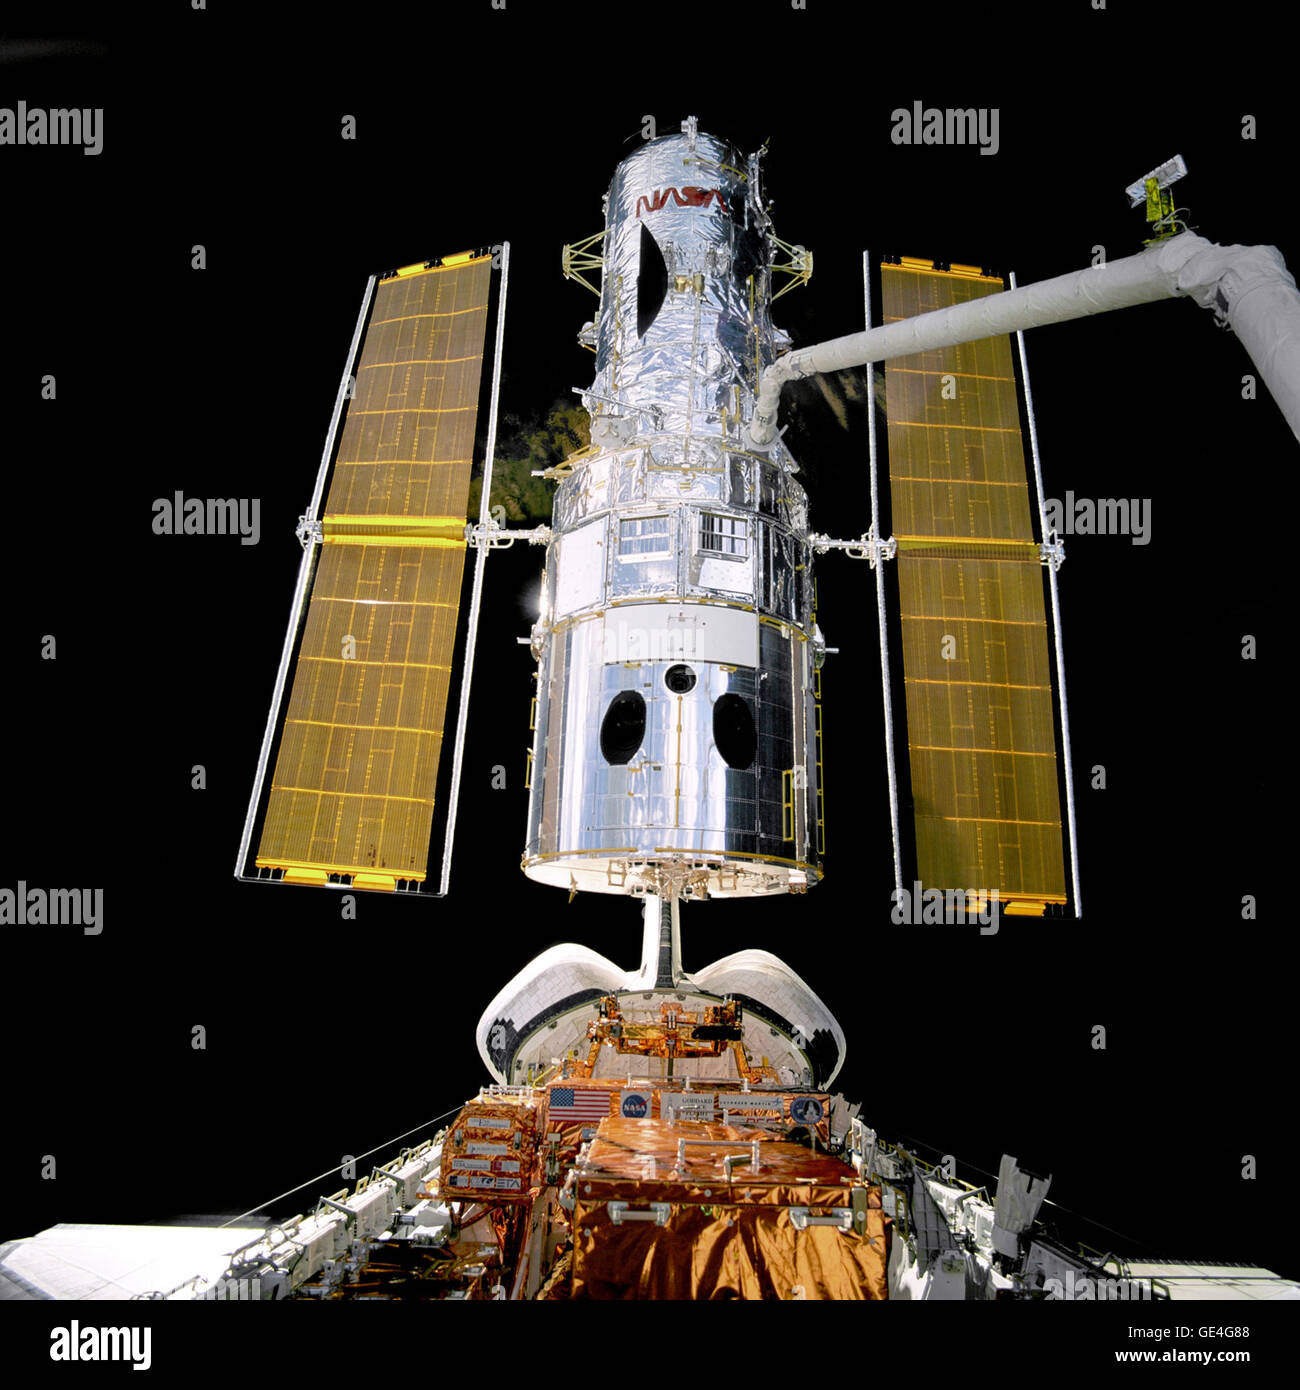 Attached to the &quot;robot arm&quot; the Hubble Space Telescope is unberthed and lifted up into the sunlight during this the second servicing mission designated HST SM-02.   Image # : STS082-709-097 Stock Photo